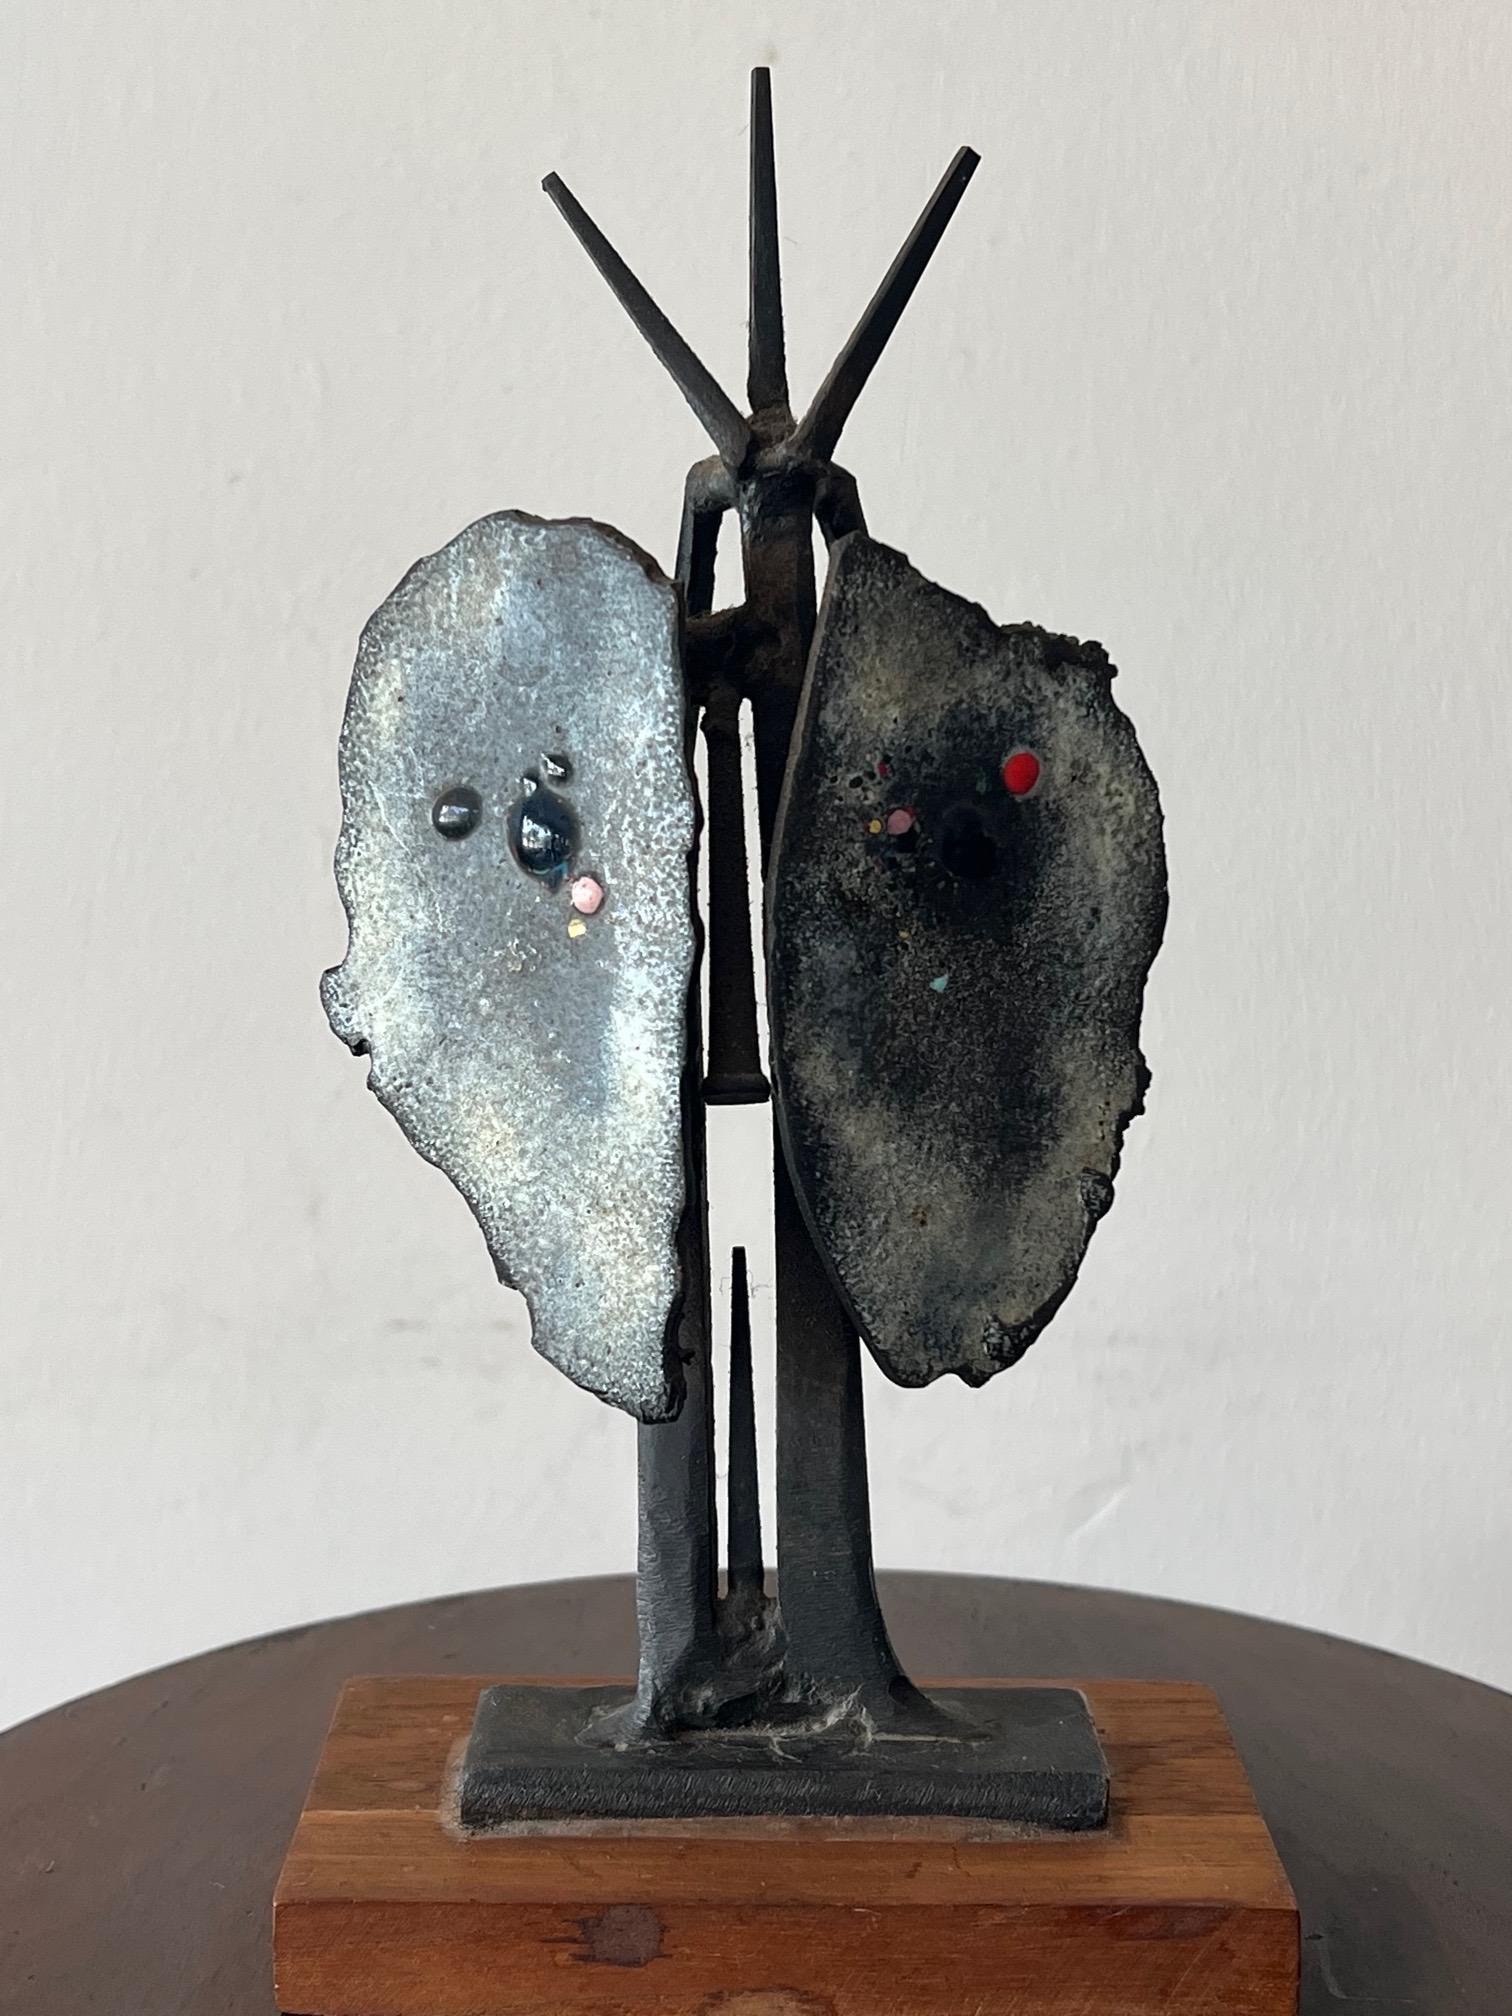 A whimsical, figurative bronze sculpture by a noted artist Chet LaMore.  